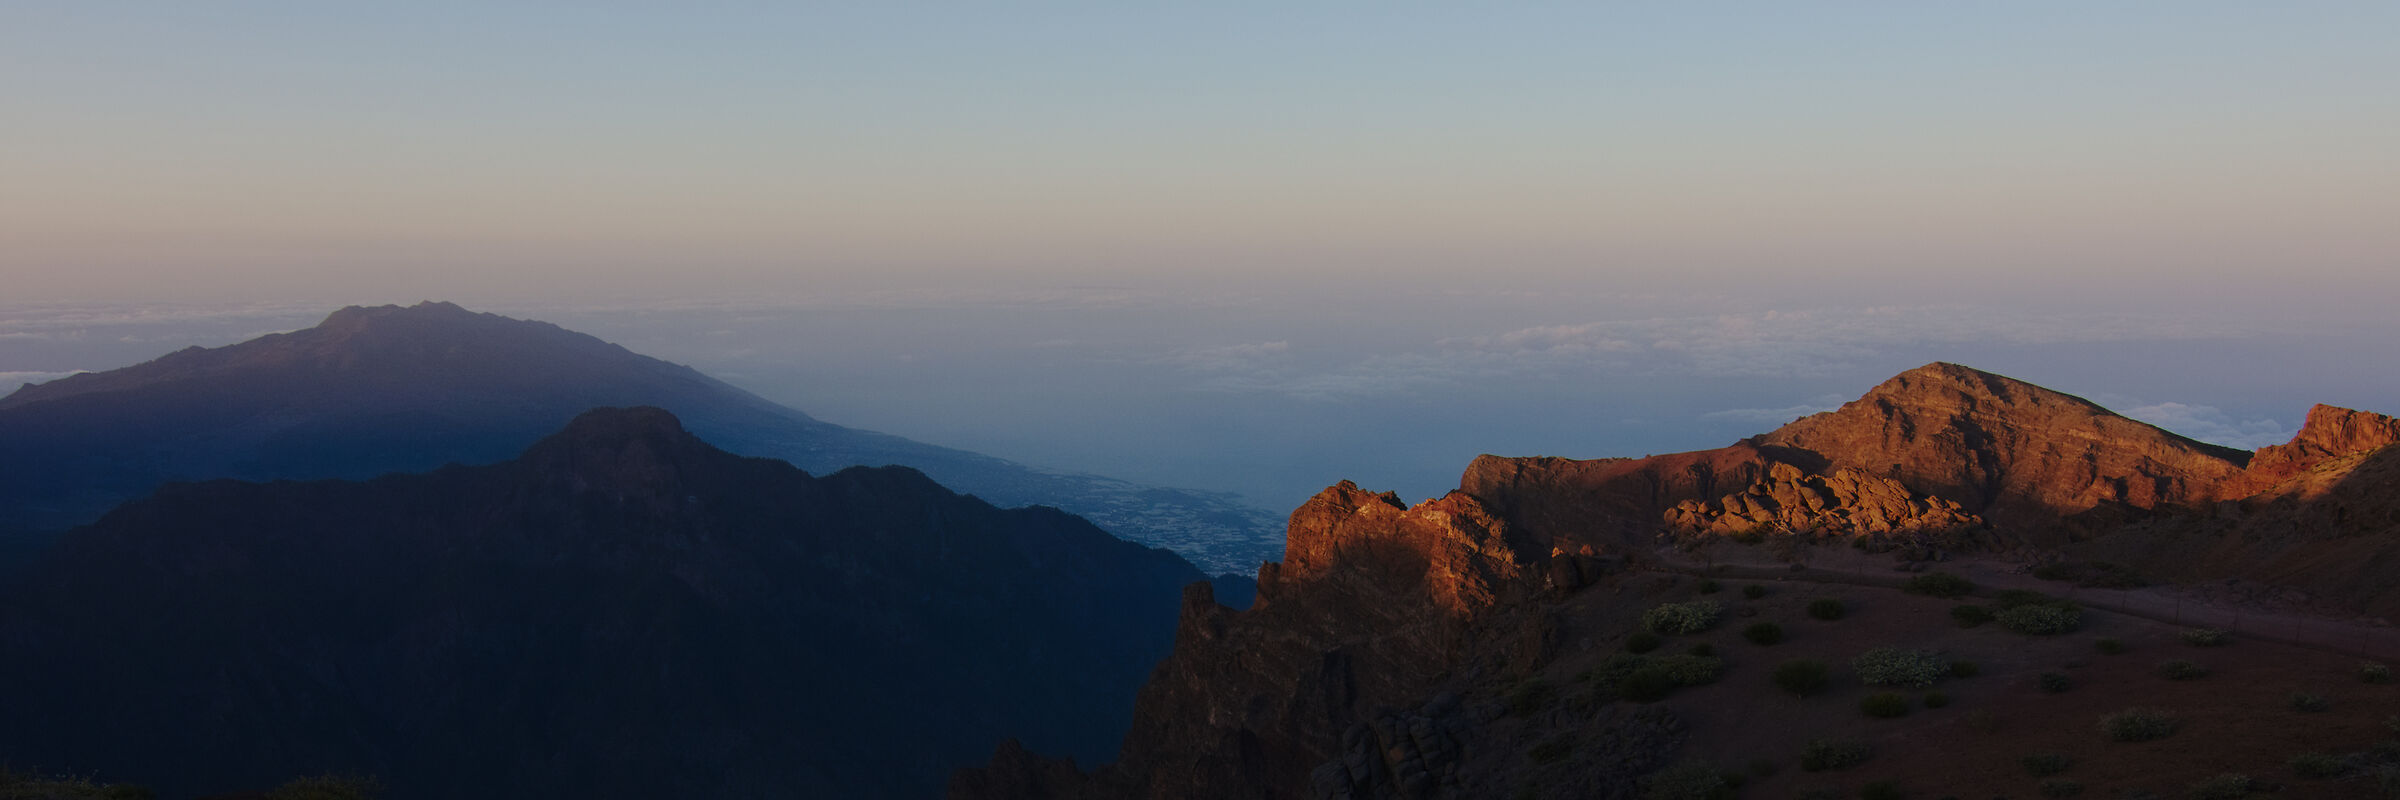 Sunrise overview from The Roque de Los Muchachos...